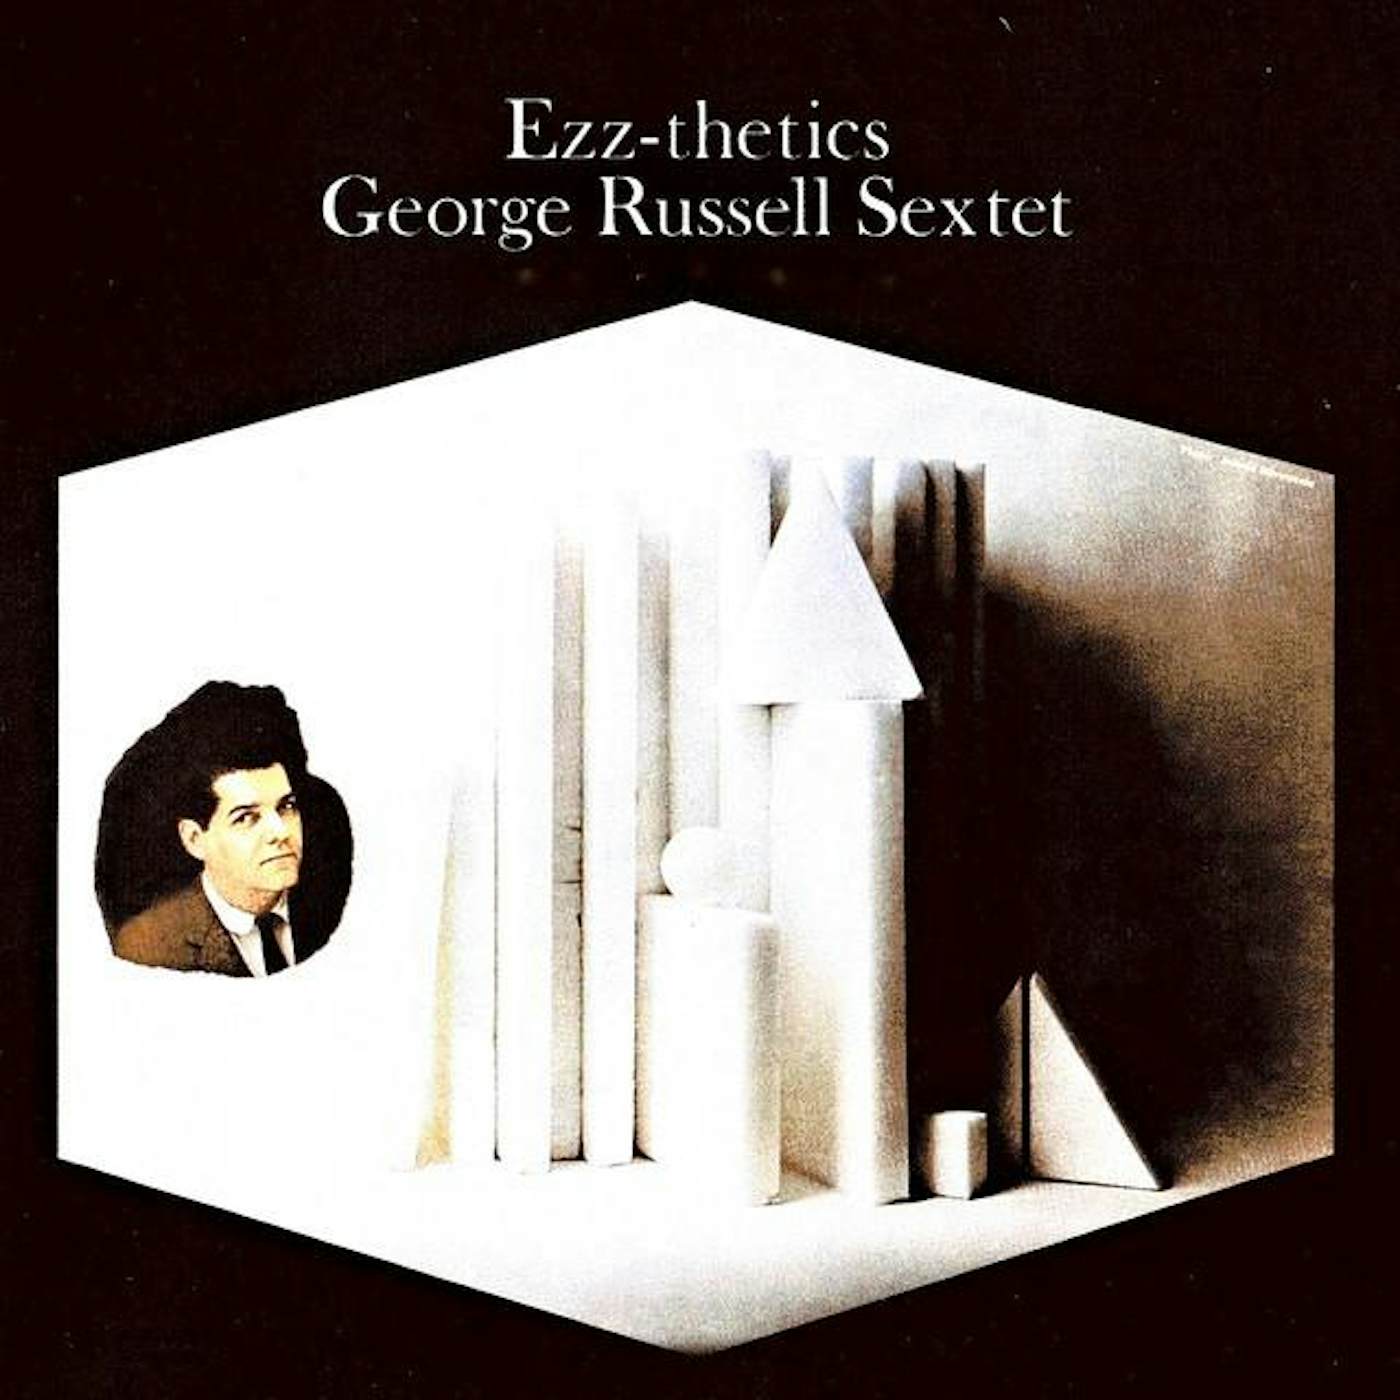 George Russell Sextet